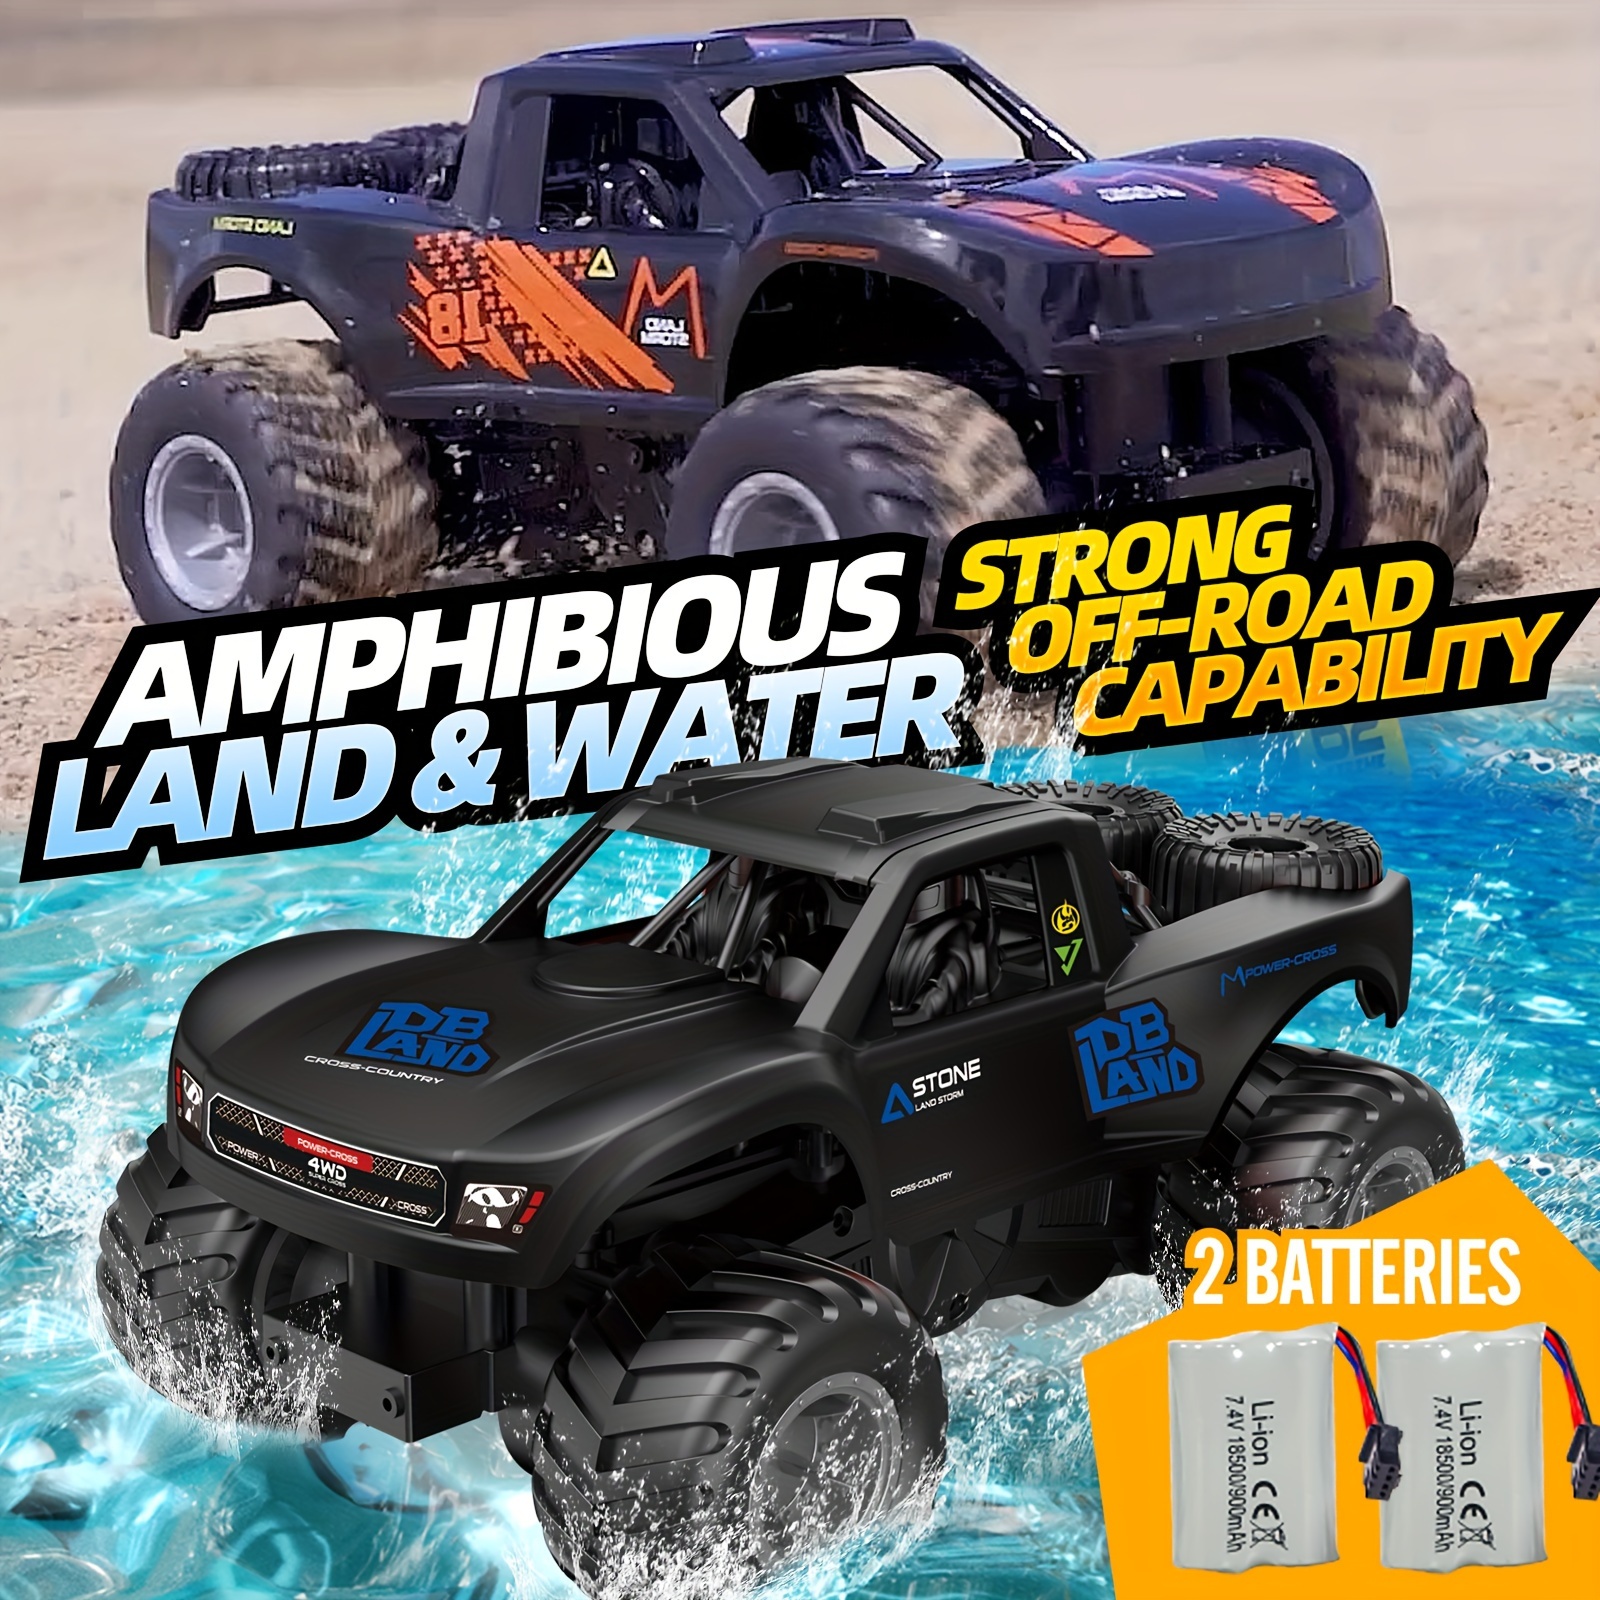 

Rc Trucks 4x4 Offroad Waterproof, 1:16 Amphibious Remote Control Car With 2 Rechargeable Battery, 4wd All Terrain Monster Truck Rc Car For Boys 4-7 Gift Present